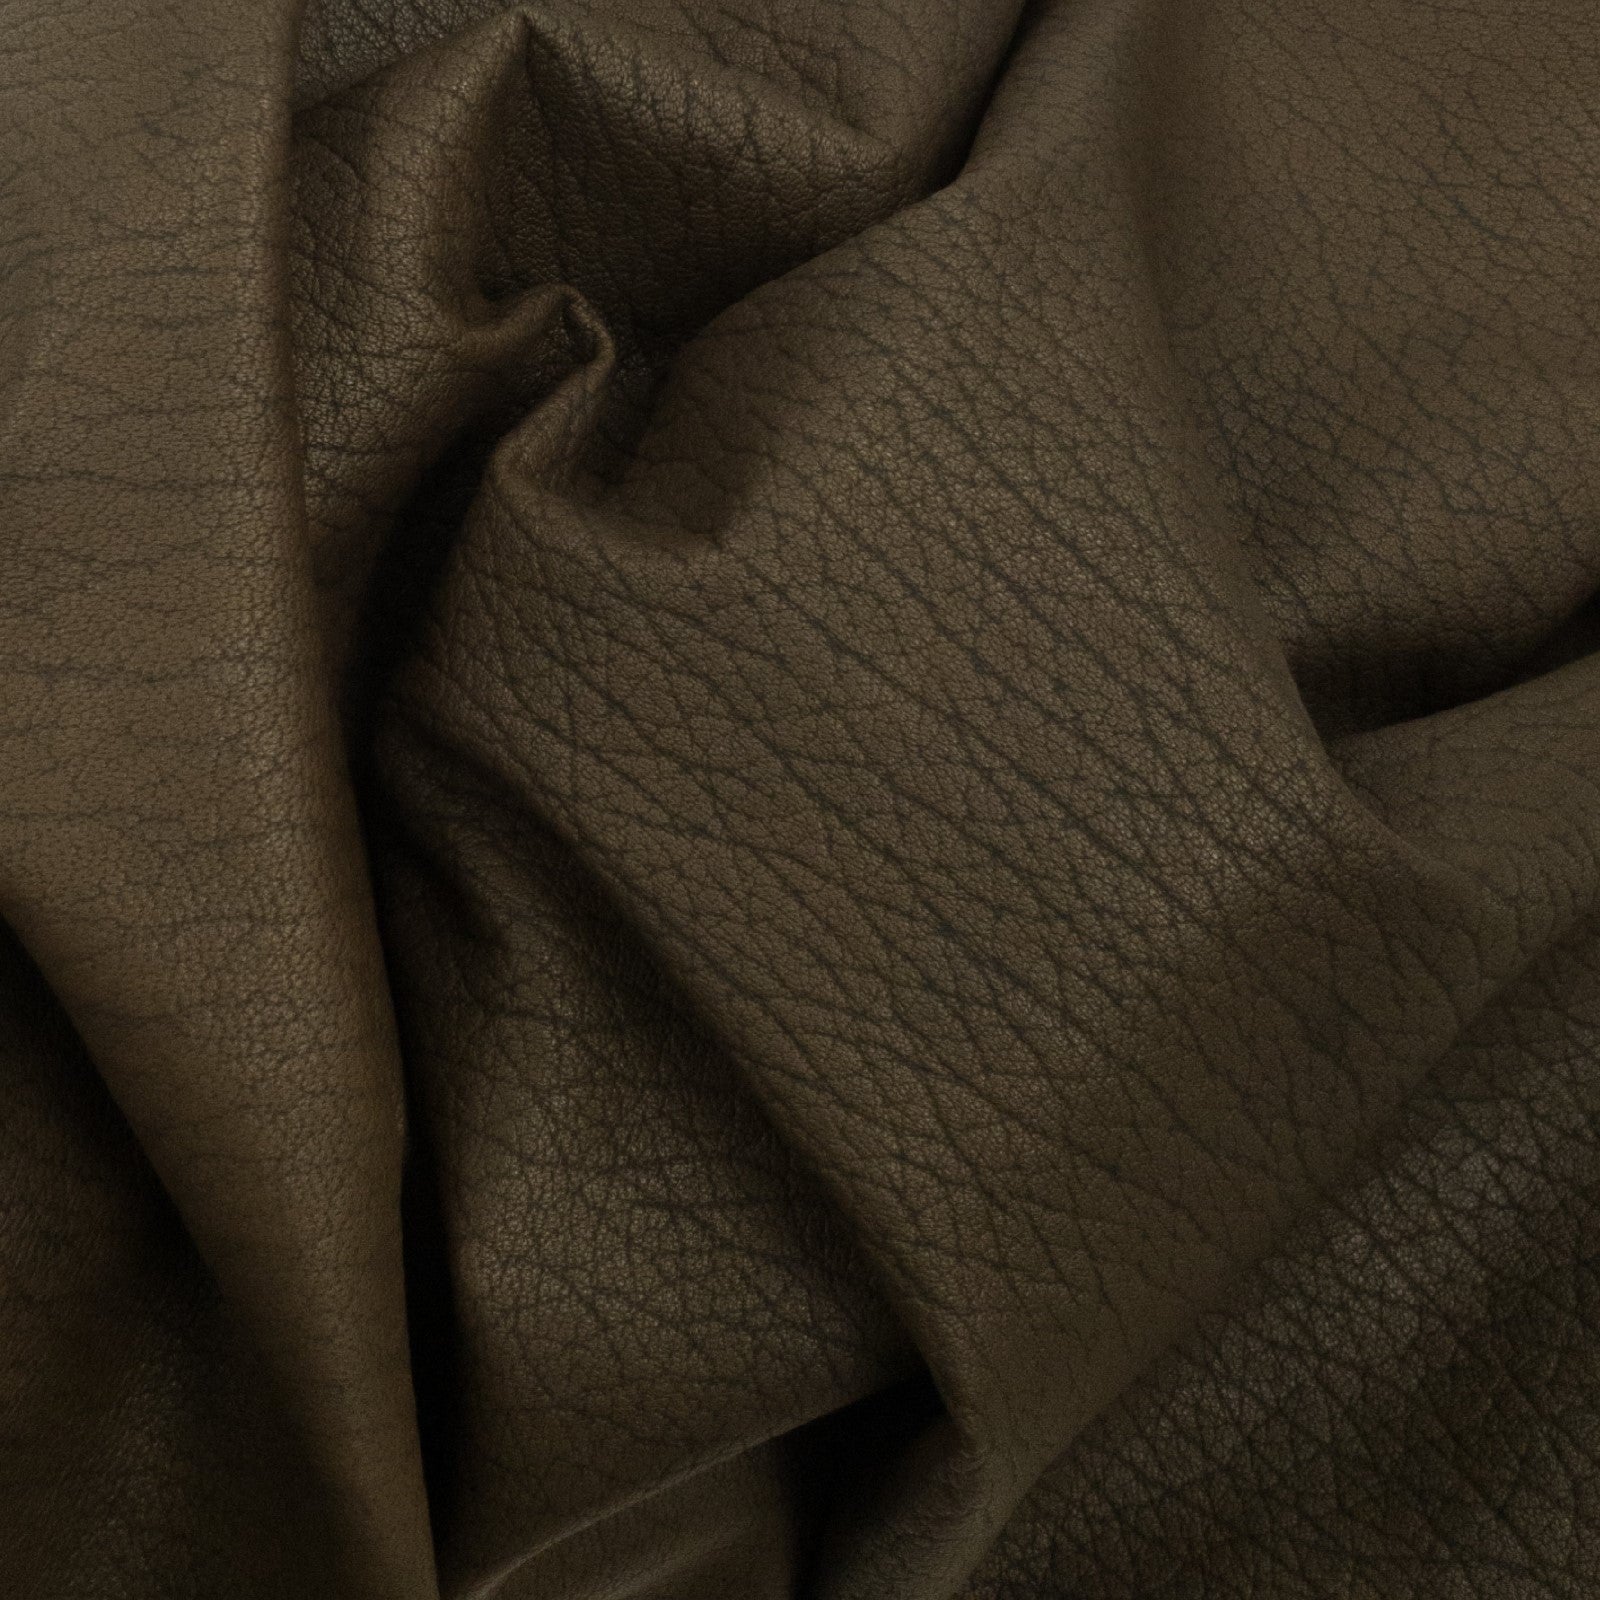 Dark Browns, 3-10 Sq Ft, 1-3 oz, Lamb Hides, Low Grade Chocolate Crackle / 9-10 / 2-3 oz (.8-1.2 MM) | The Leather Guy